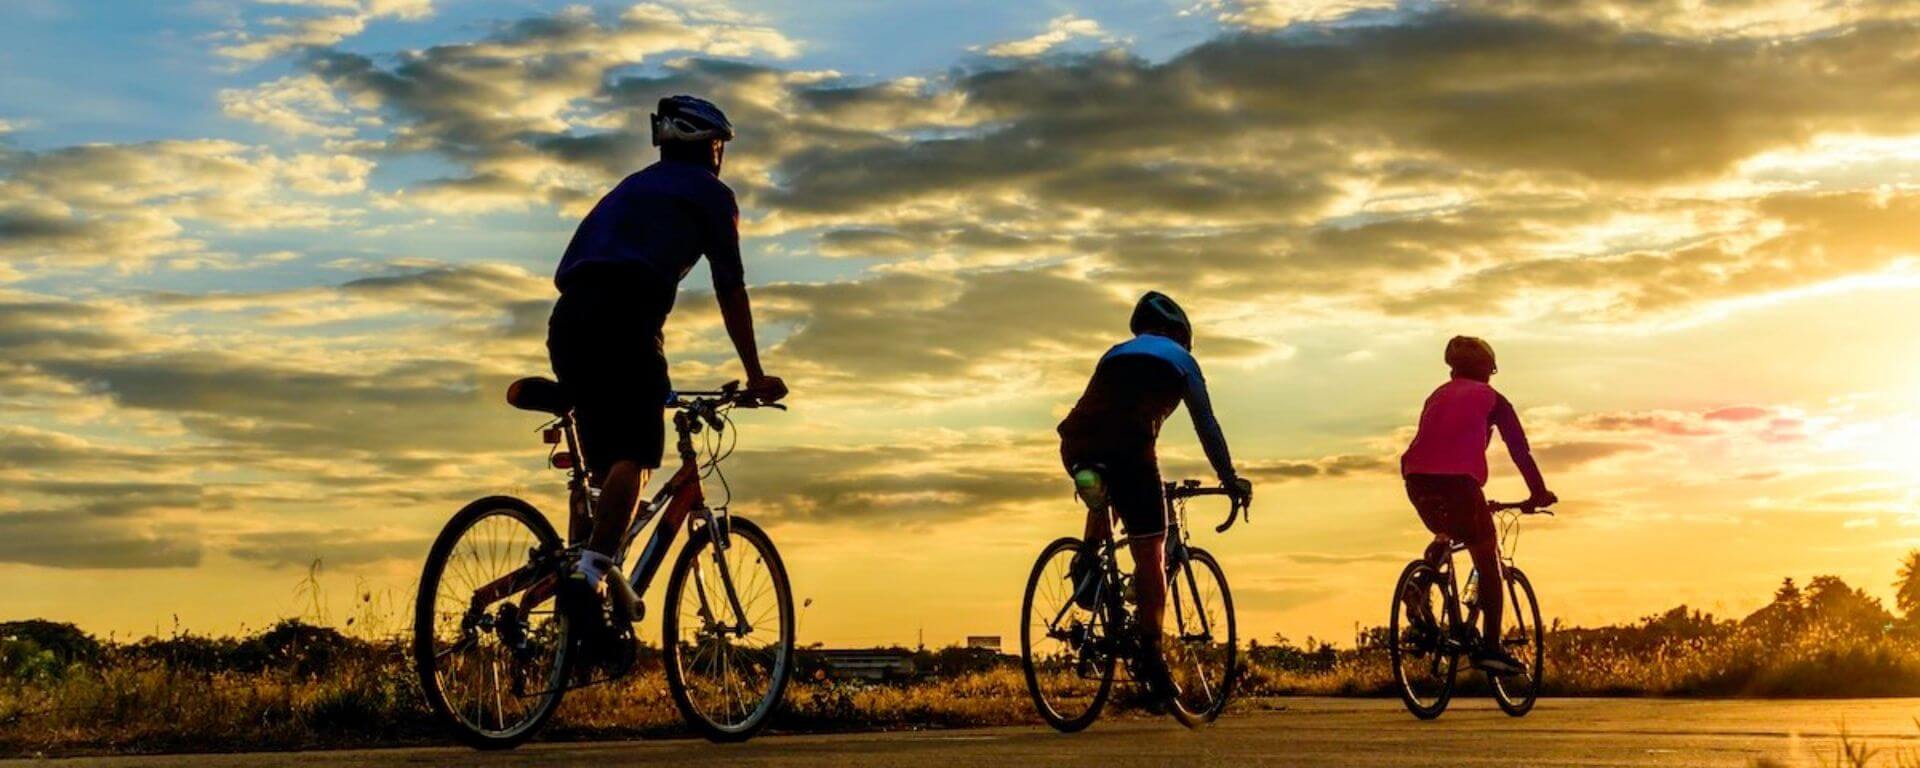 3 cyclists on a road at sunset.